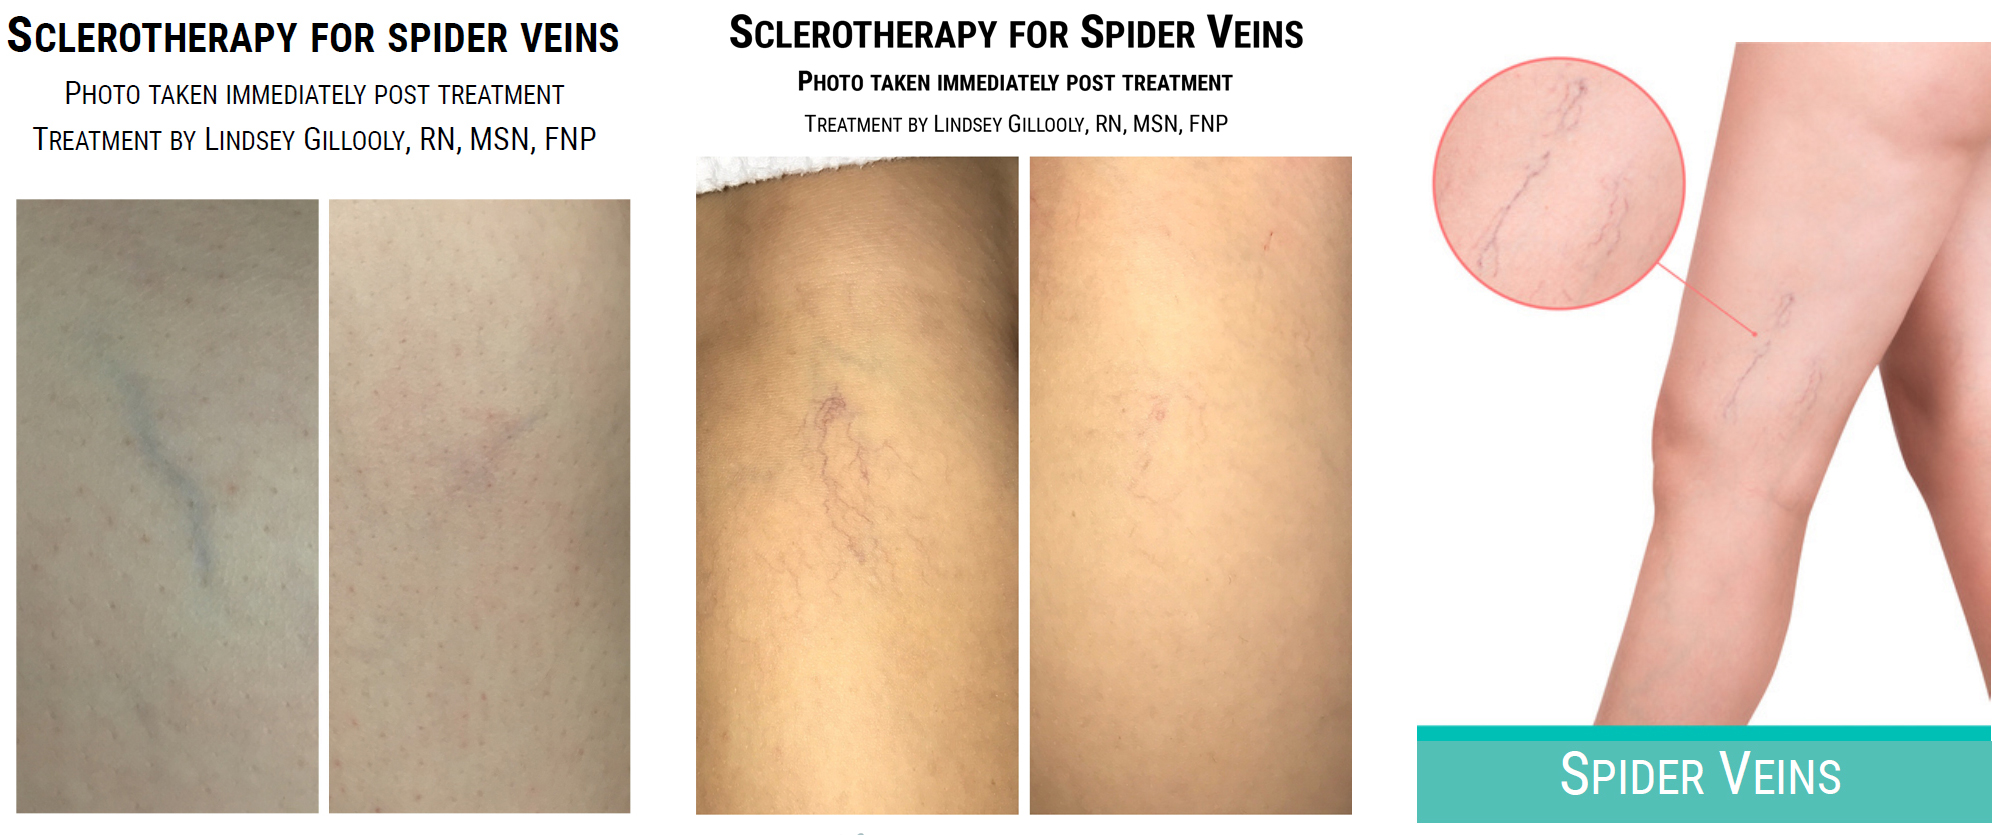 Dream Spa Medical Blog | Sclerotherapy To Treat Spider Veins